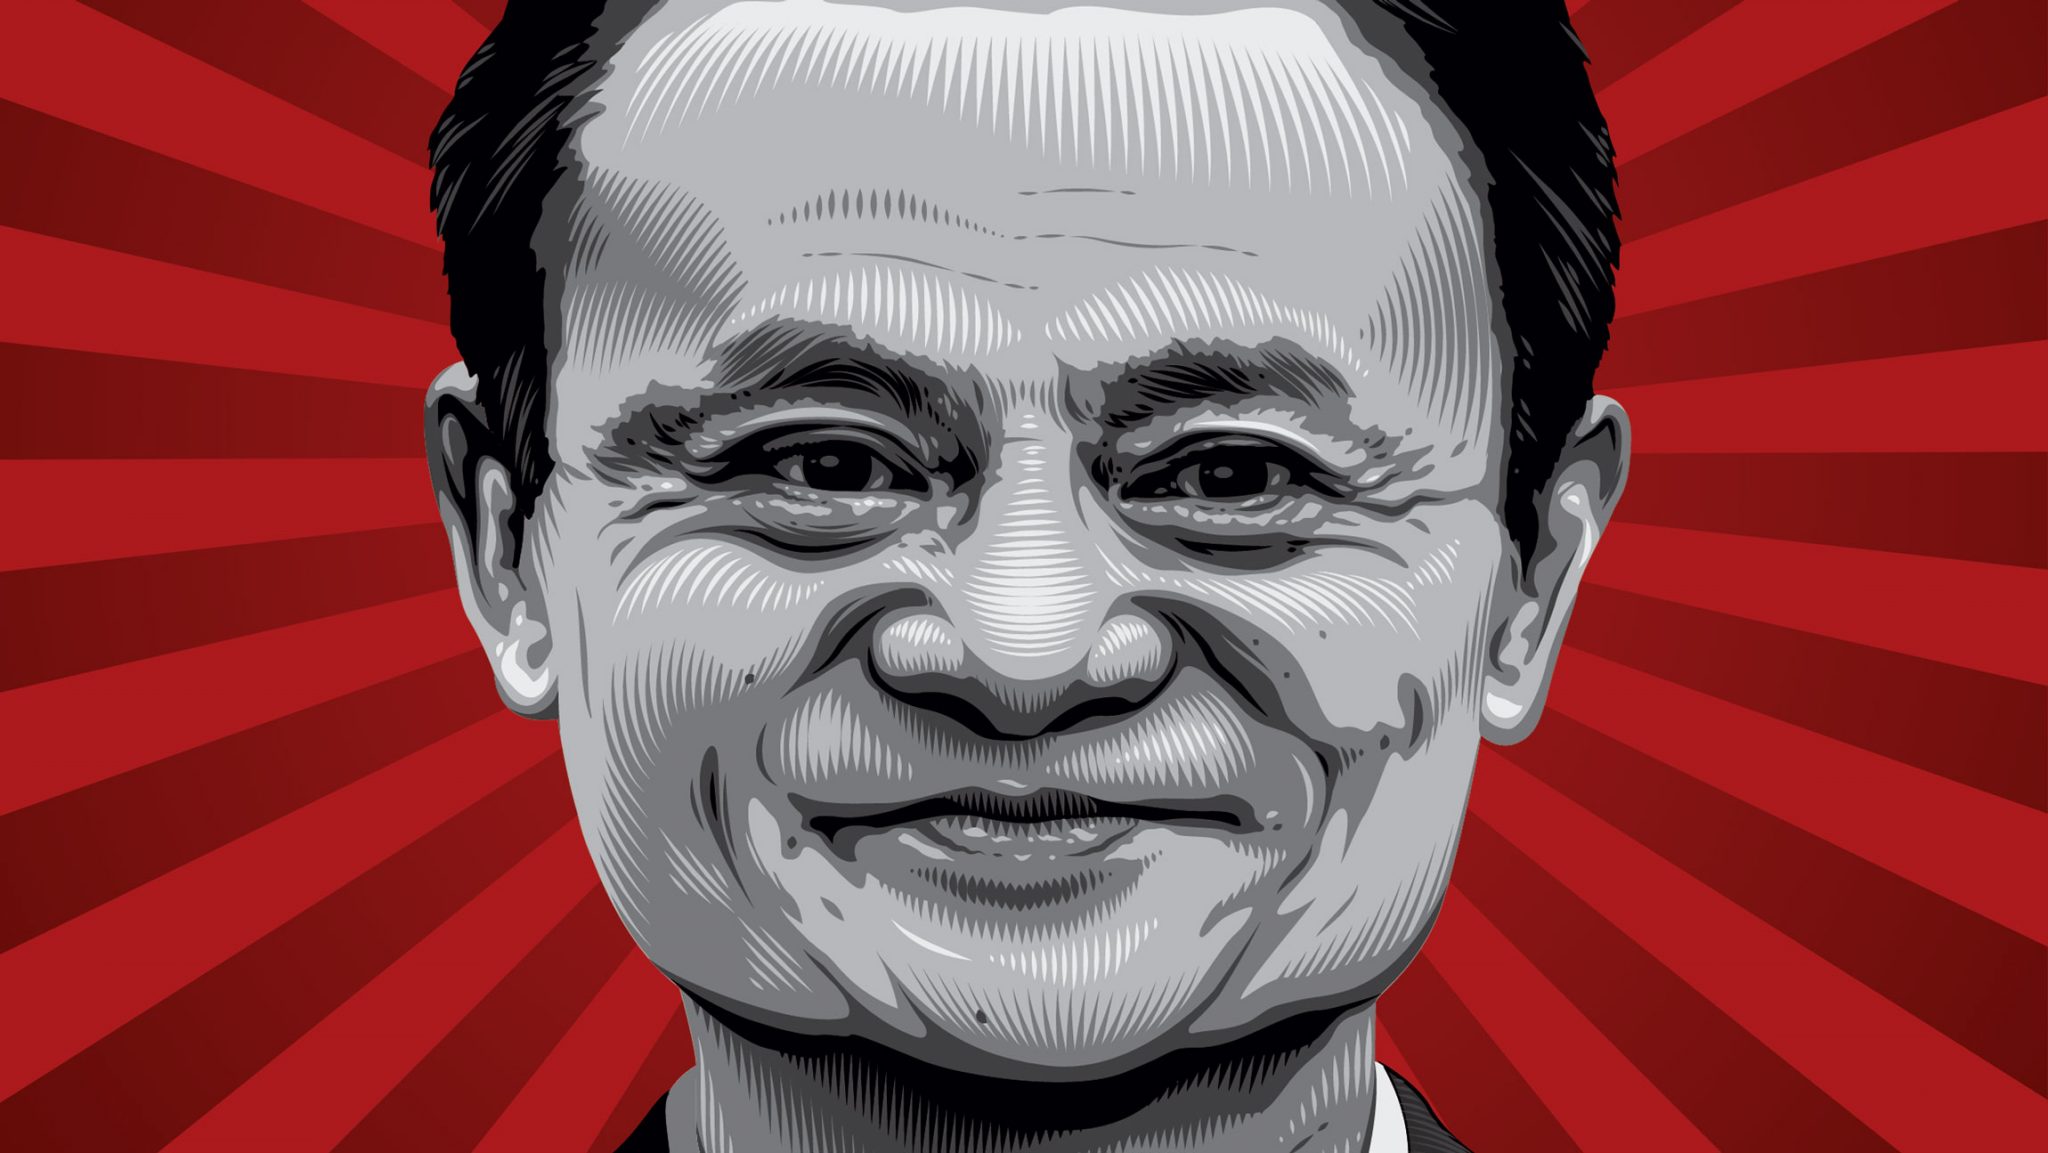 Alibaba founder Jack Ma was rejected from 30 jobs ...